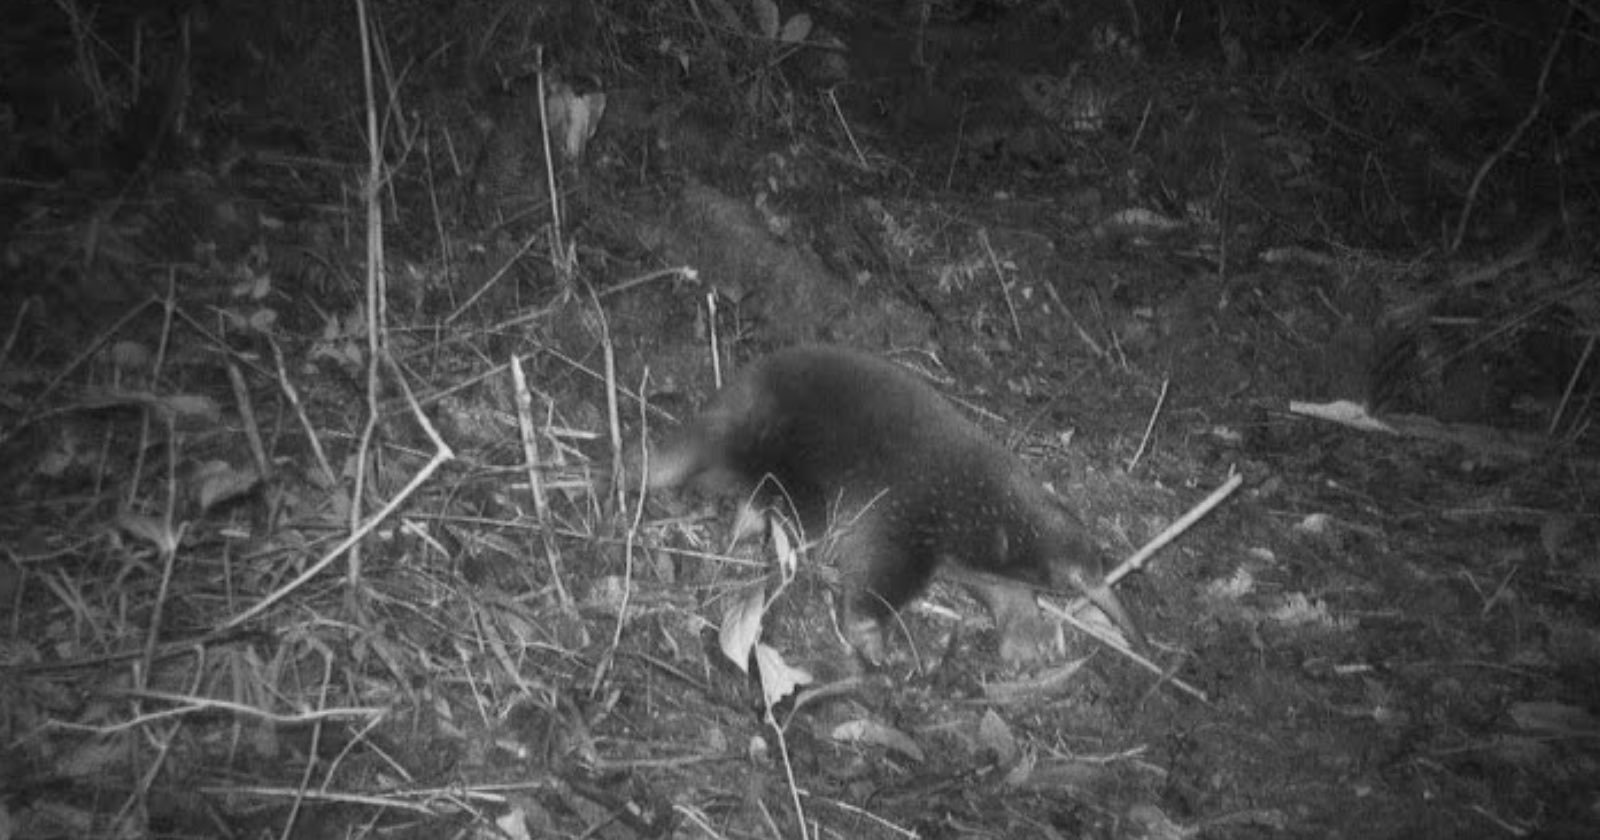  egg-laying mammal thought extinct rediscovered trail camera 